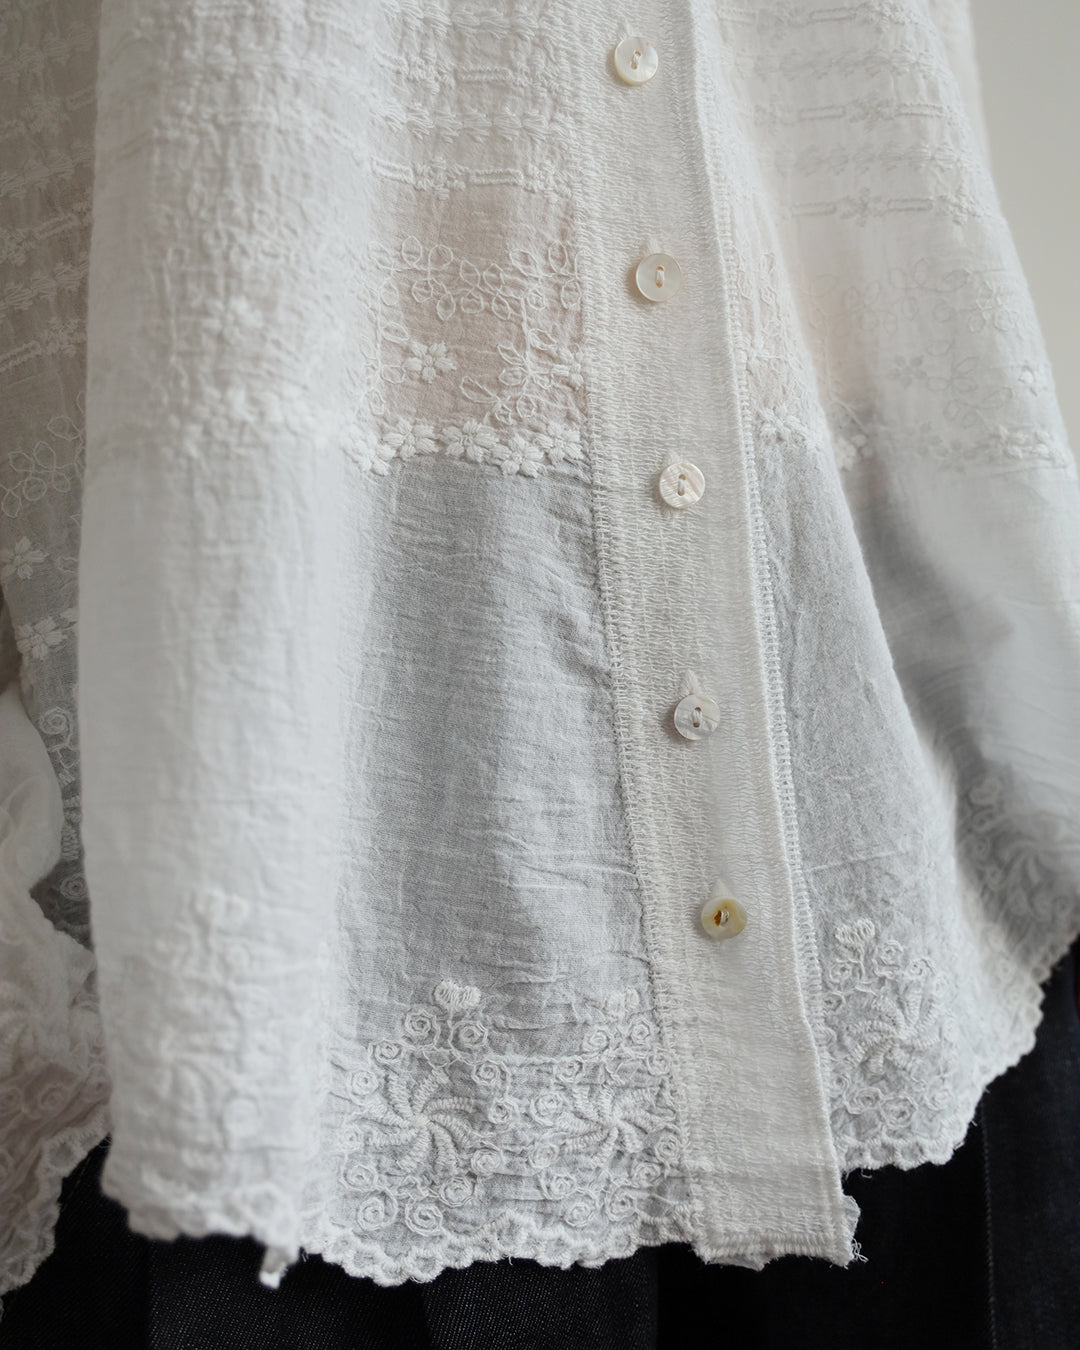 Embroidery Blouse